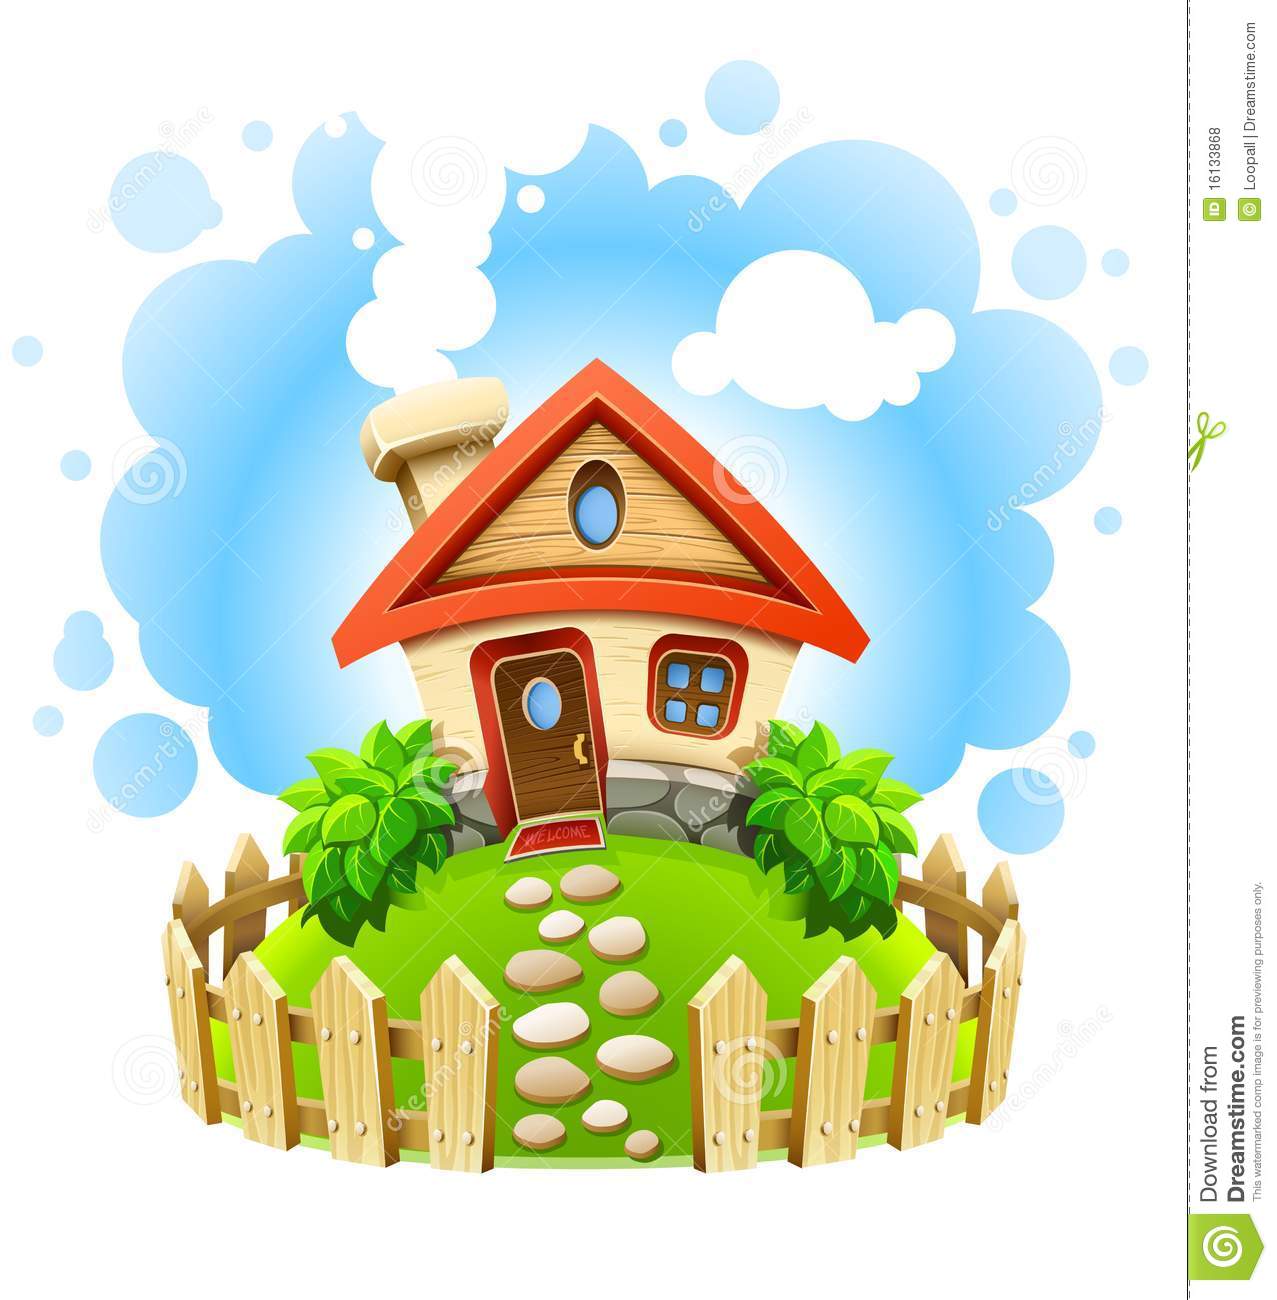 Fairy Tale House In Yard With Wooden Fence Royalty Free Stock Photos